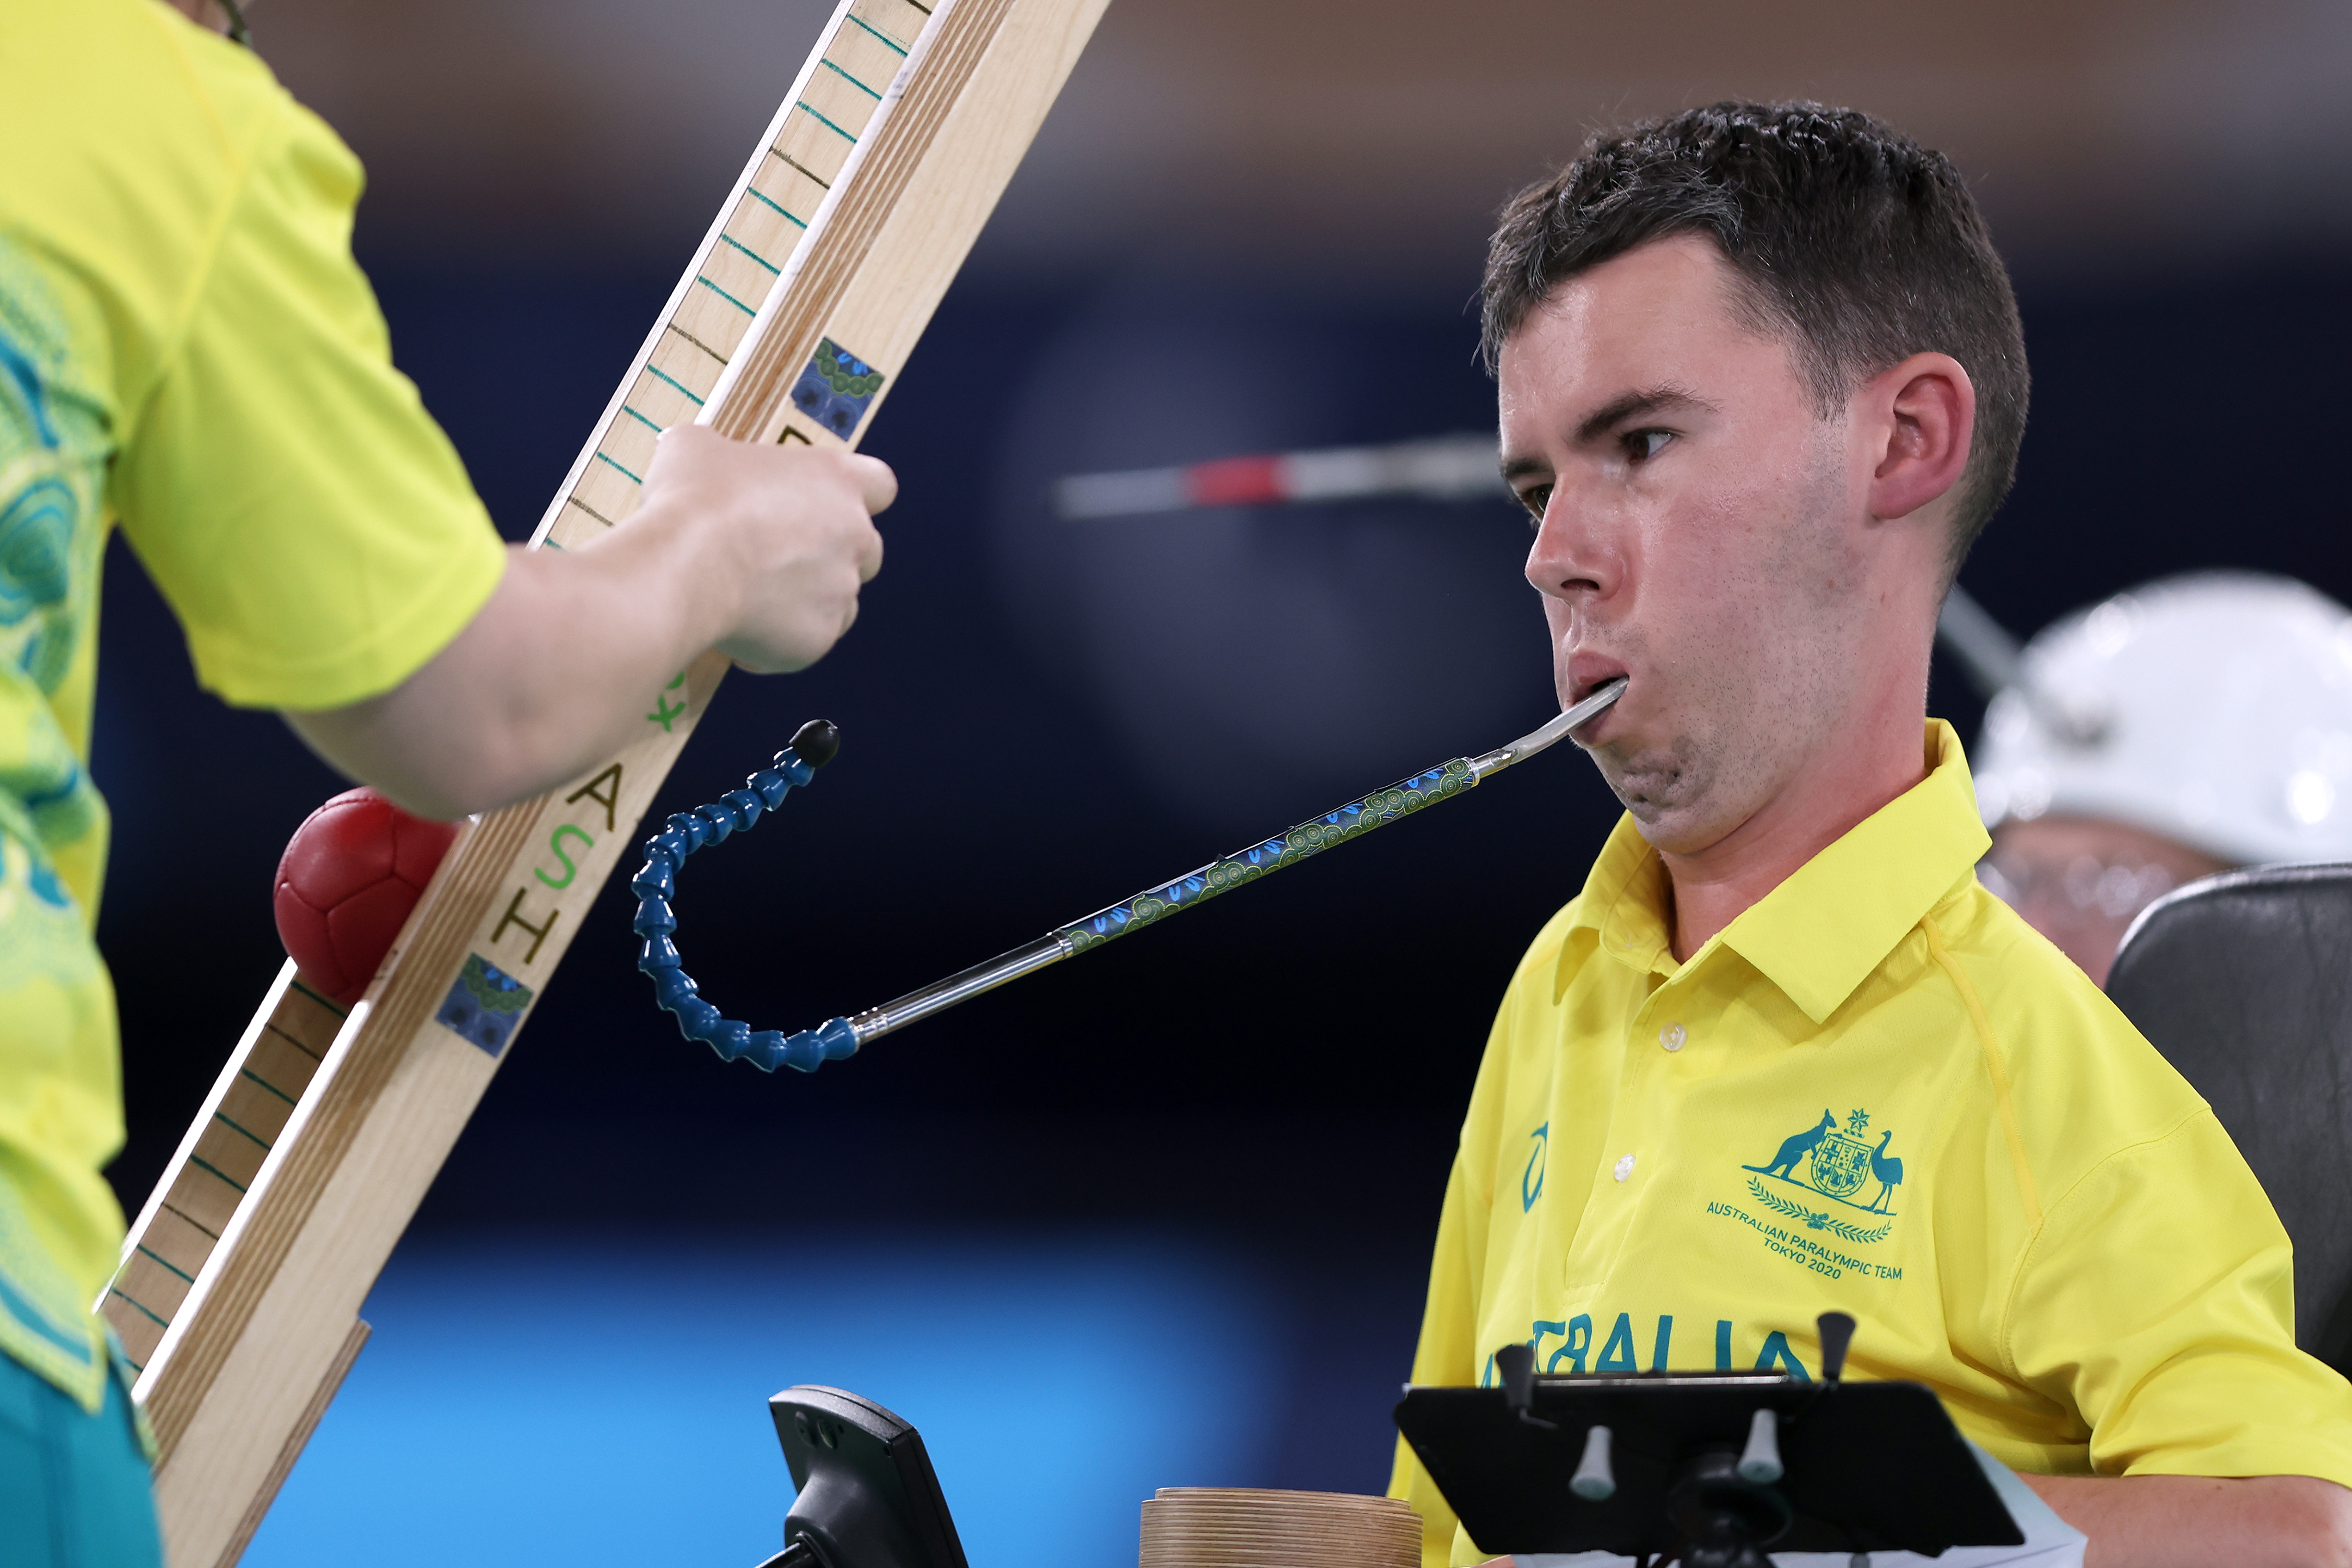 Daniel Michel of Team Australia competes against Scott McCowan of Team Great Britain in the Boccia Mixed Individual - BC3 Bronze Medal match on day 8 of the Tokyo 2020 Paralympic Games